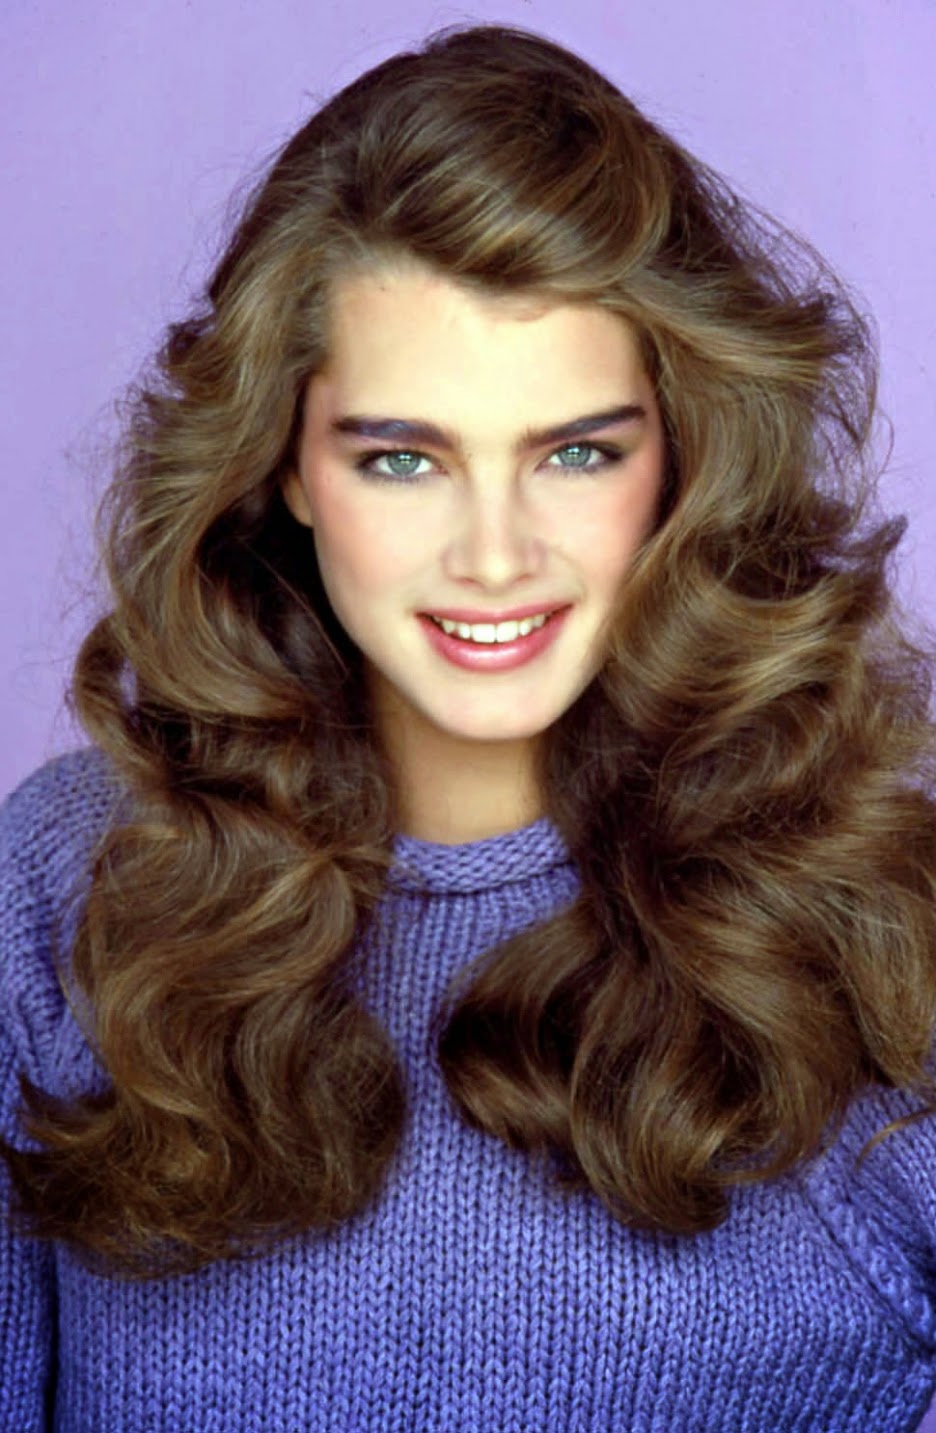 Hollywood Actress Wallpaper: Brooke Shields Wallpapers